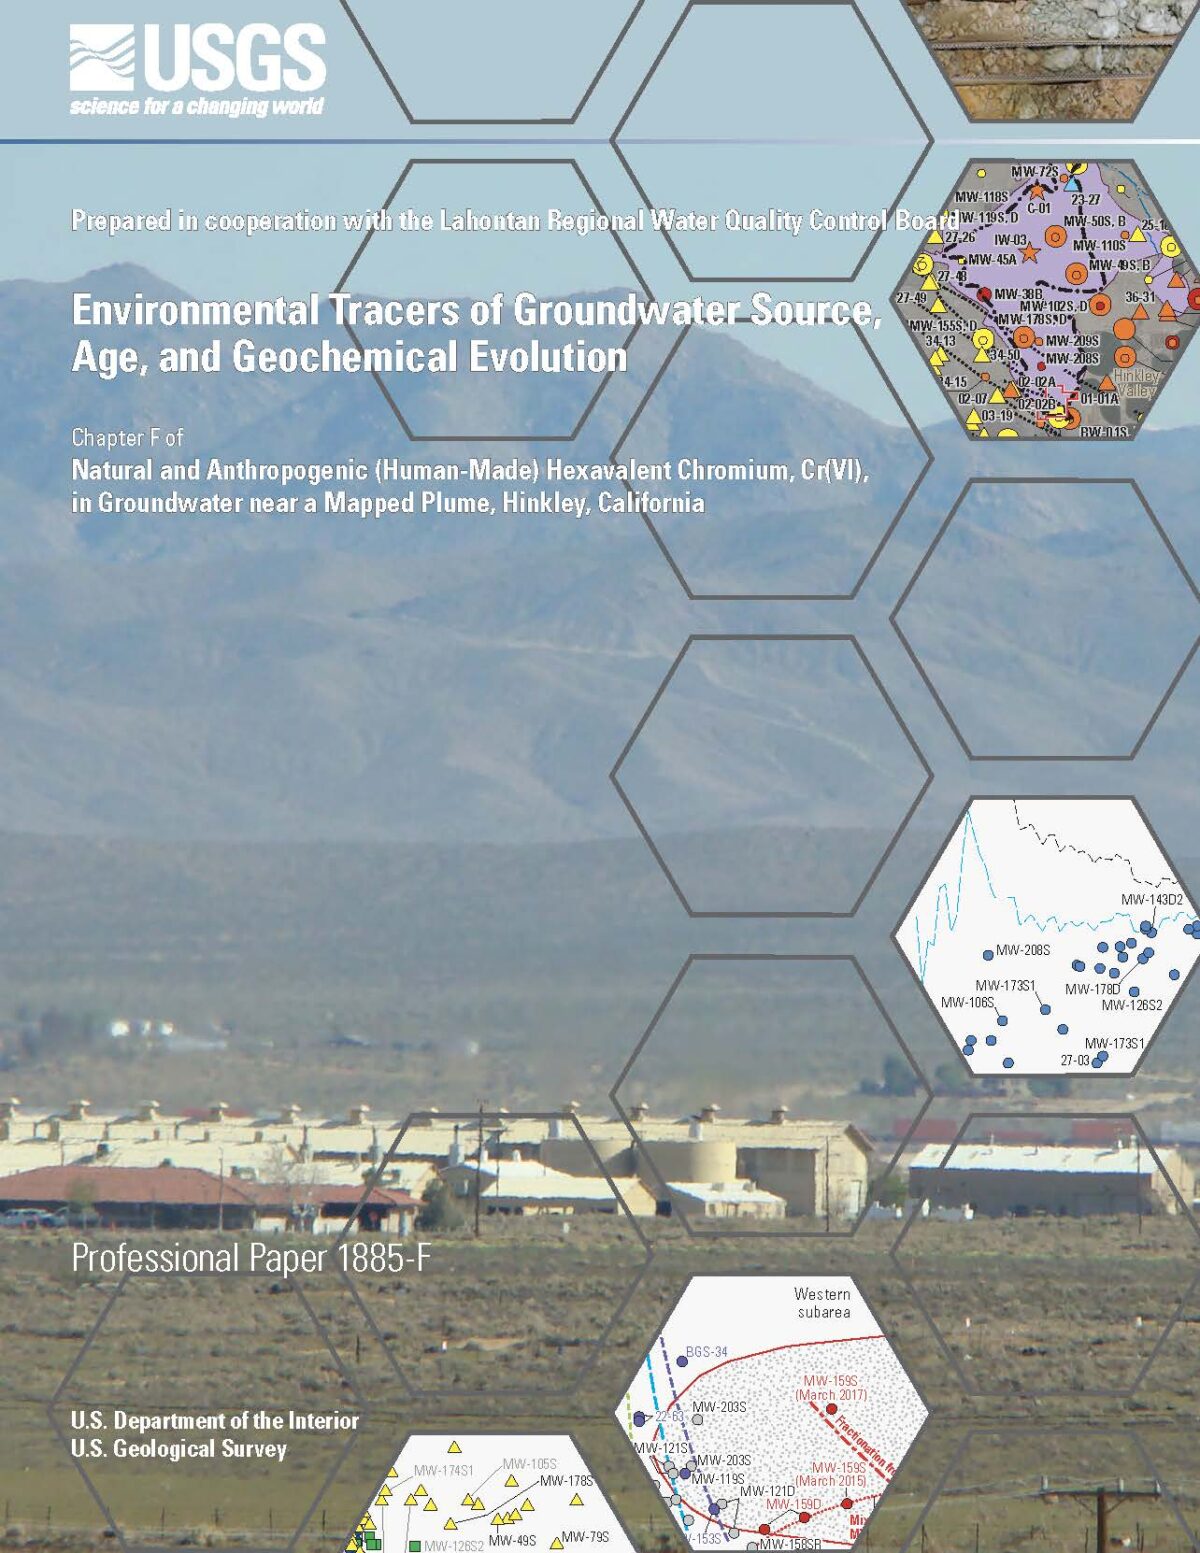 Chapter F of Natural and Anthropogenic (Human-Made) Hexavalent Chromium, Cr(VI), in Groundwater near a Mapped Plume, Hinkley, California: Environmental Tracers of Groundwater Source, Age, and Geochemical Evolution